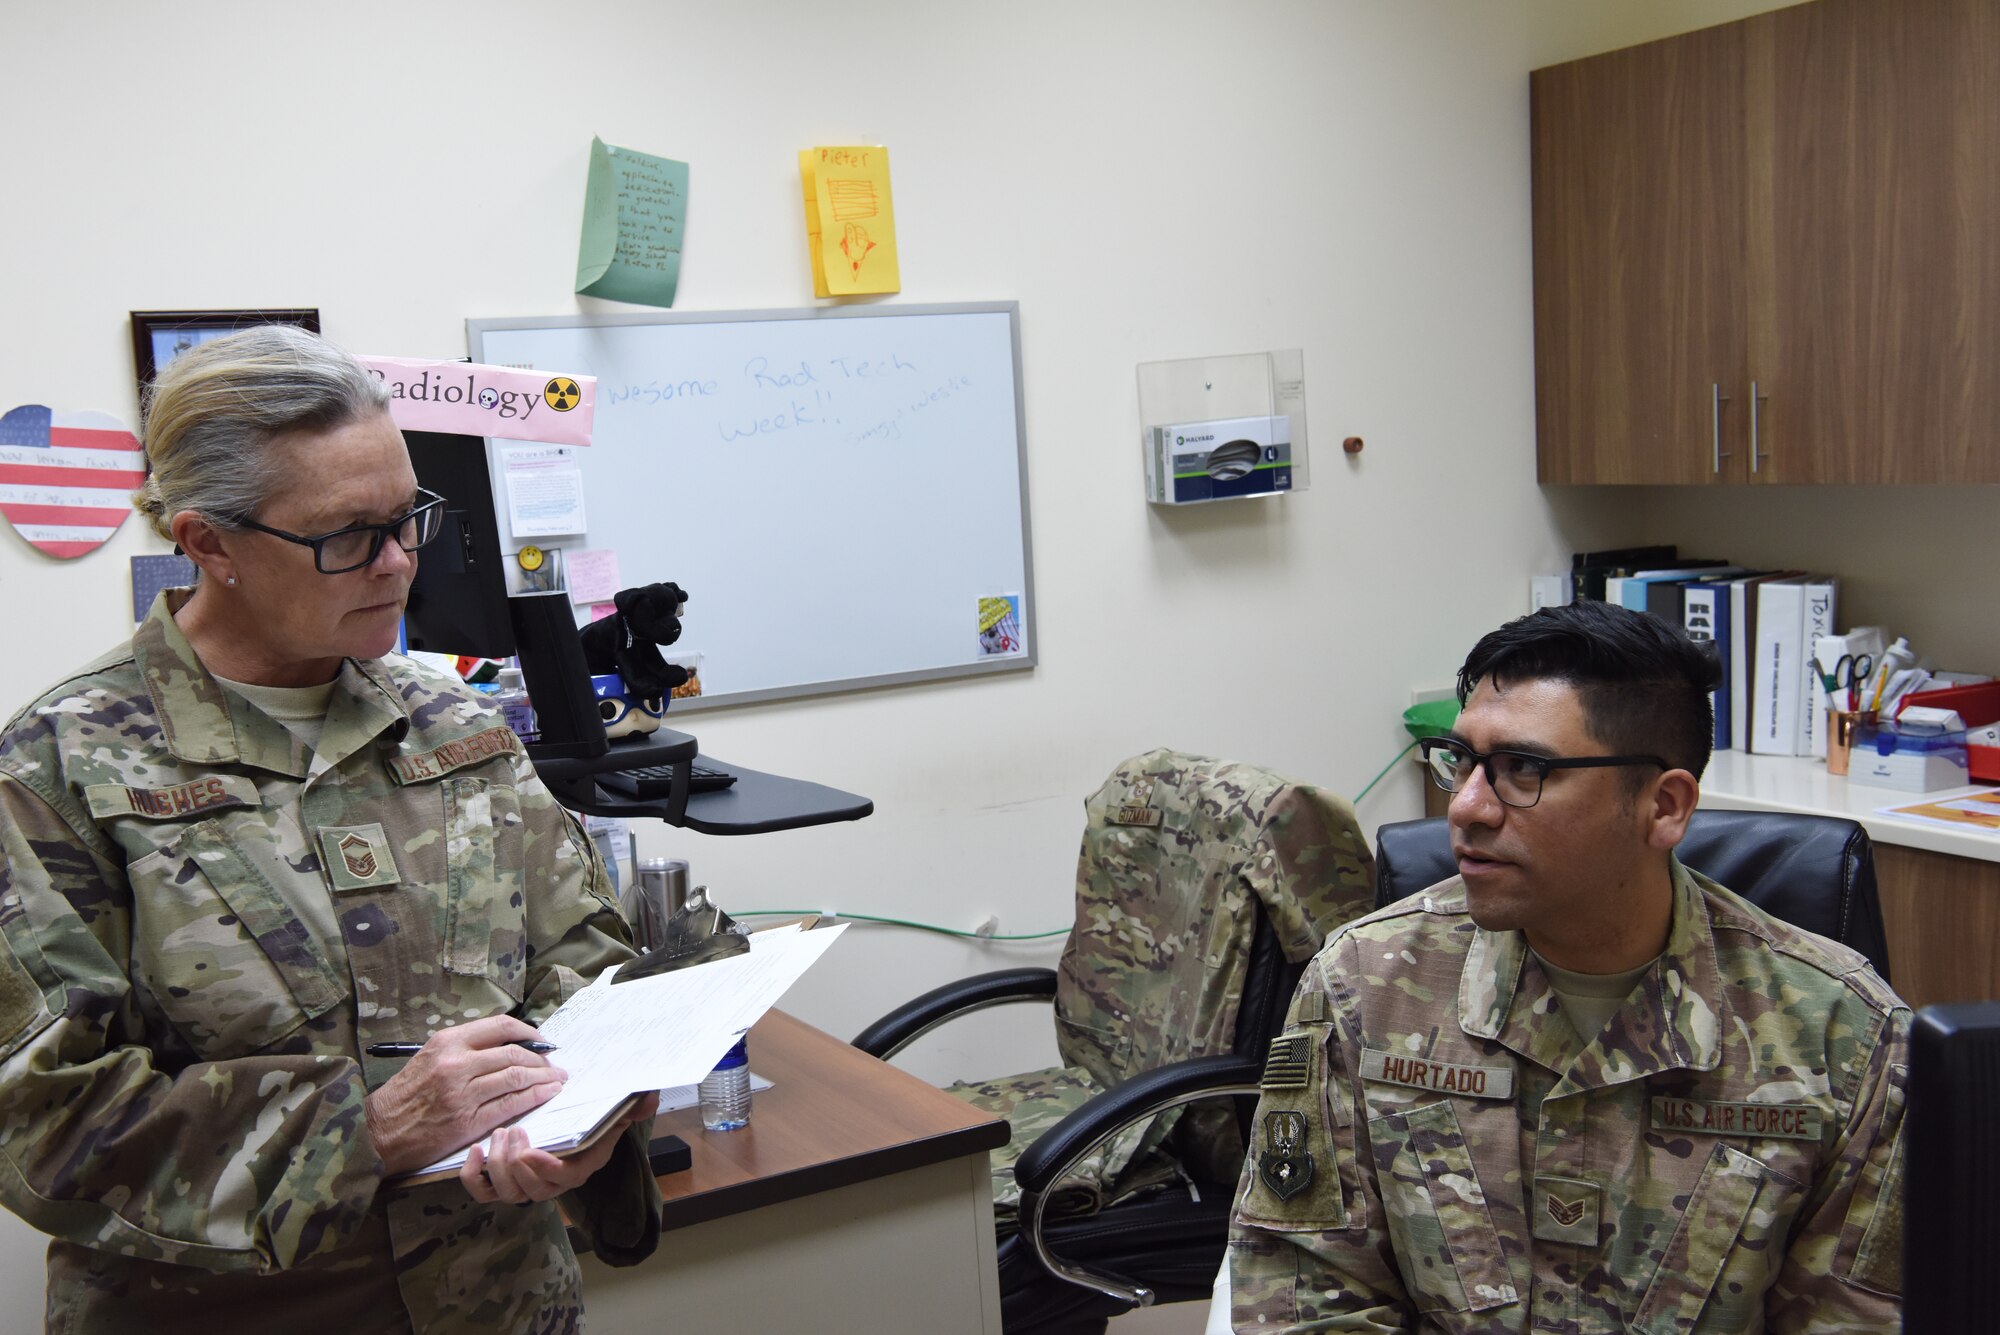 Senior Master Sgt. Patricia Hughes, 380th Expeditionary Medical Group superintendent of public health and evaluator, asks questions to Staff Sgt. Vincent Hurtado, 380th EMDG laboratory technician, as part of the public health exercise at Al Dhafra Air Base, United Arab Emirates, Feb 18-22, 2019.